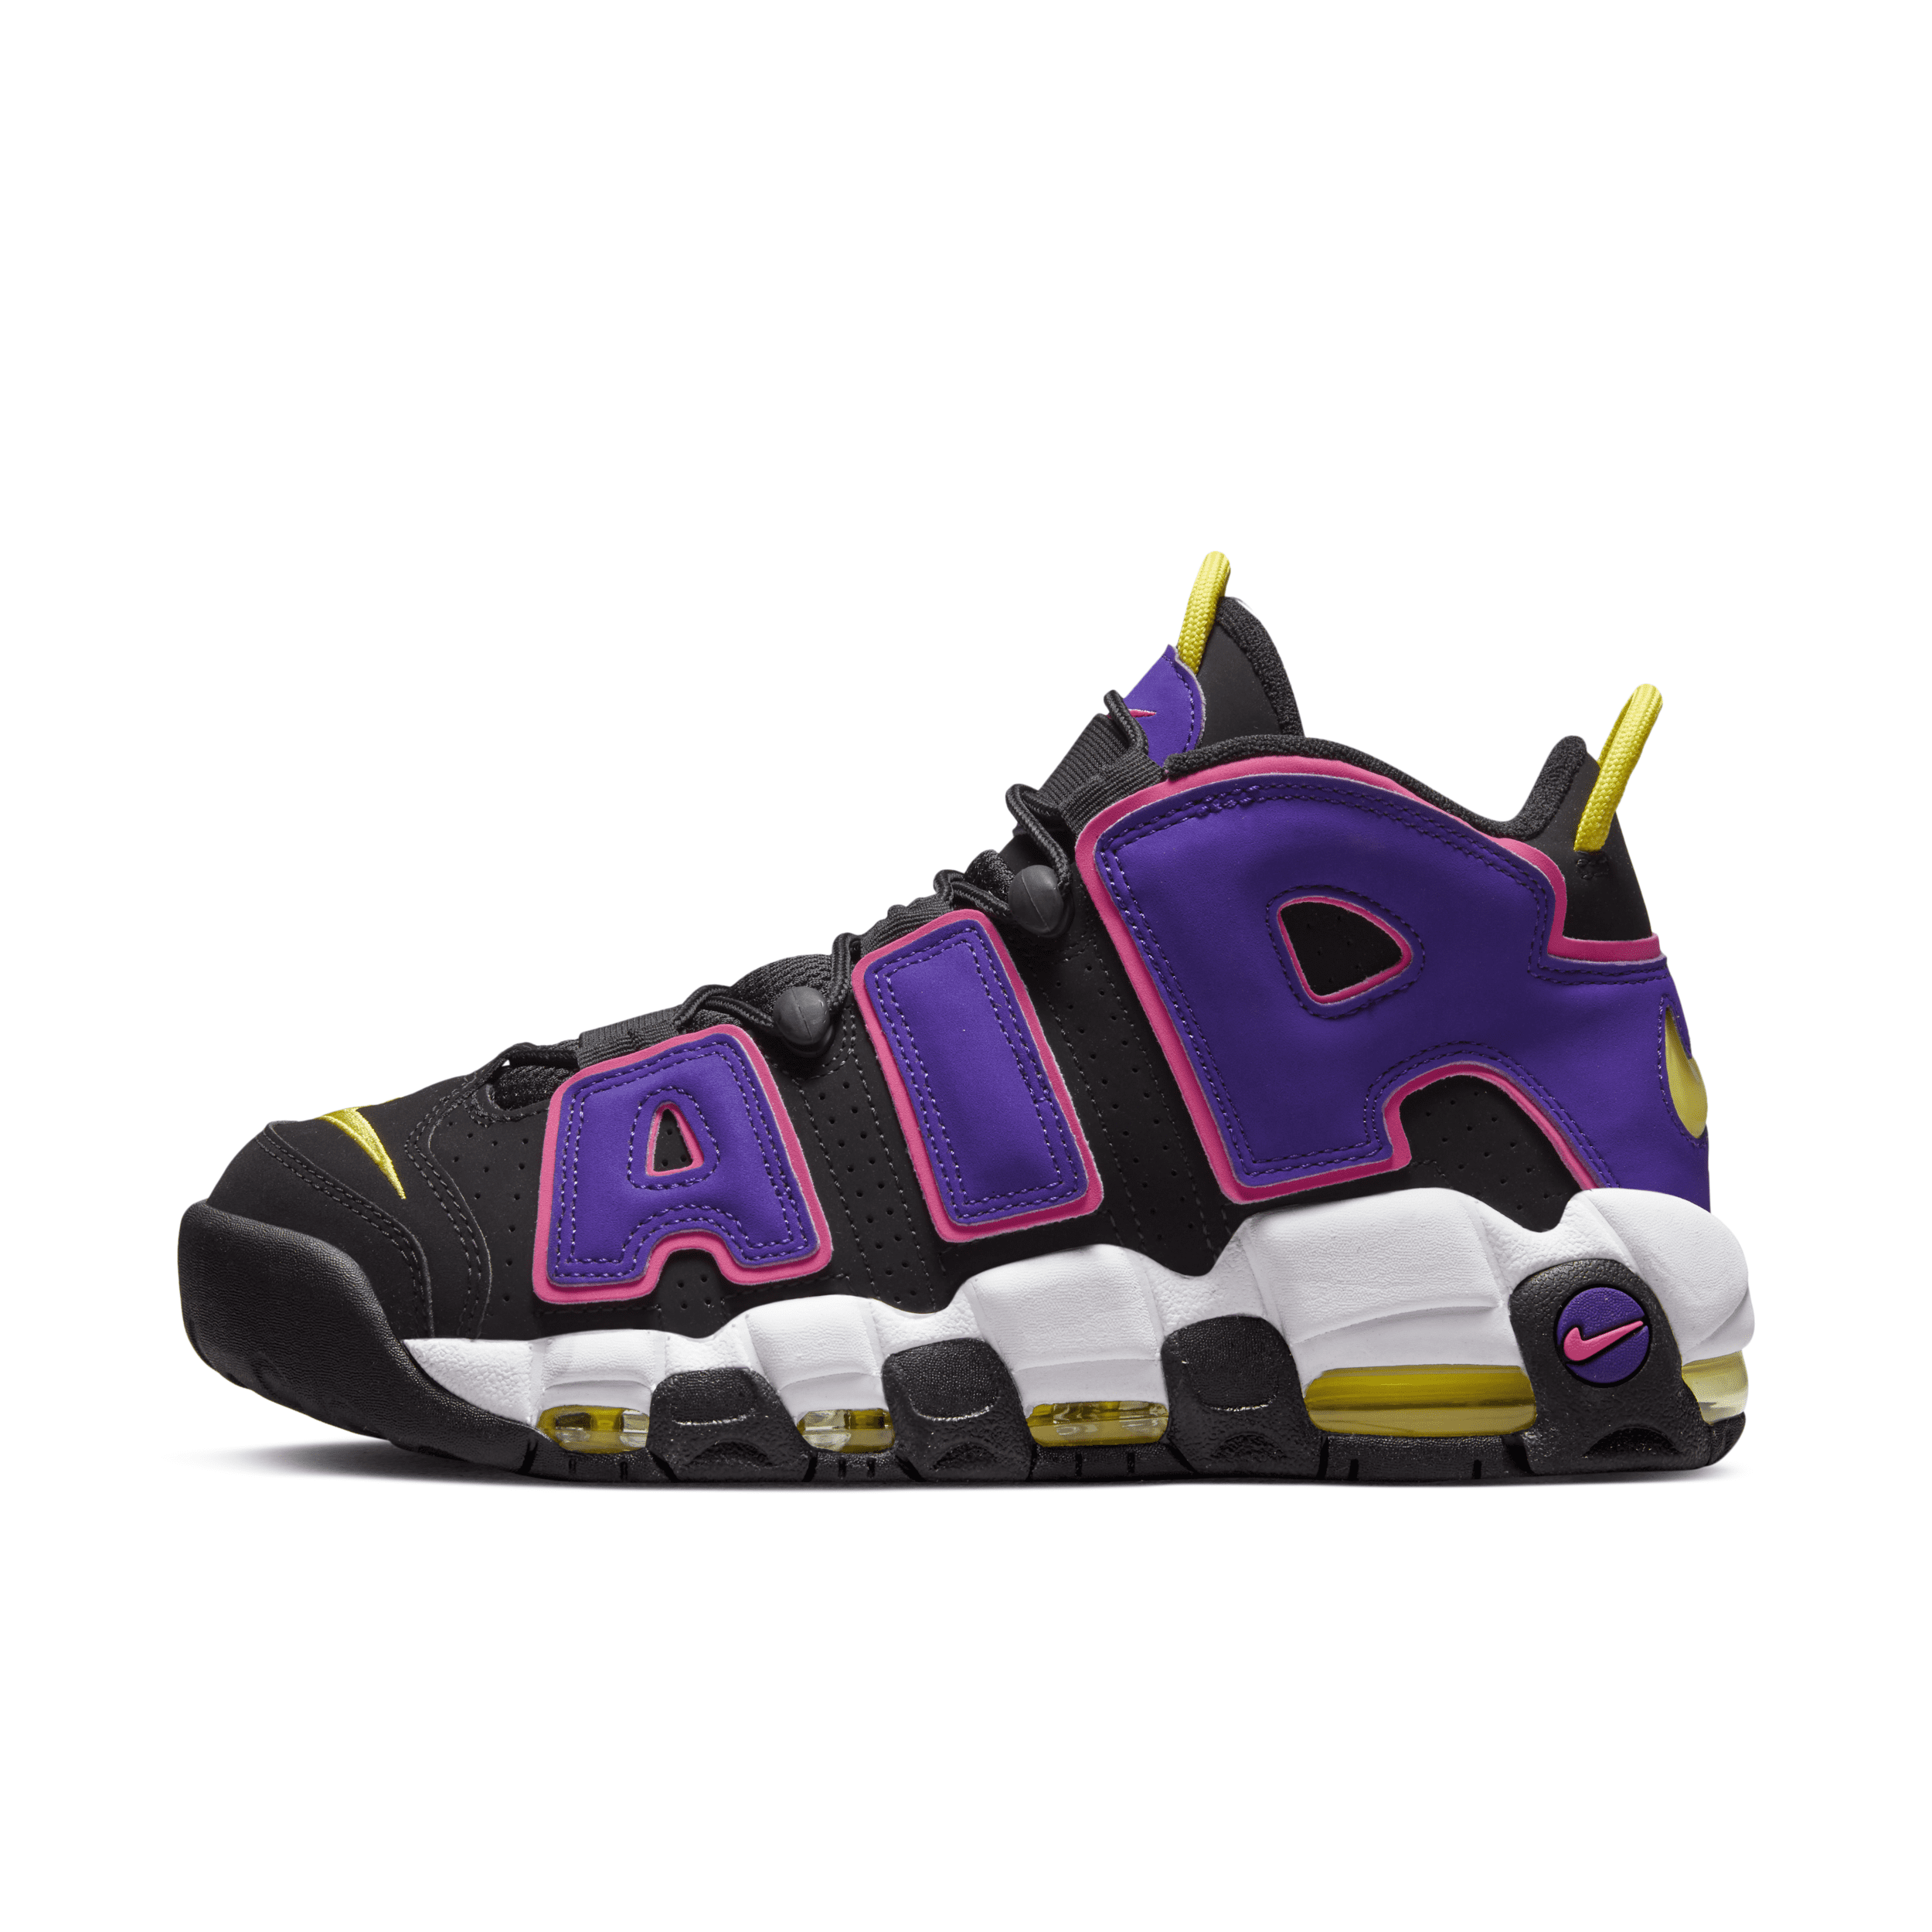 Nike Black Air More Uptempo '96 Sneakers